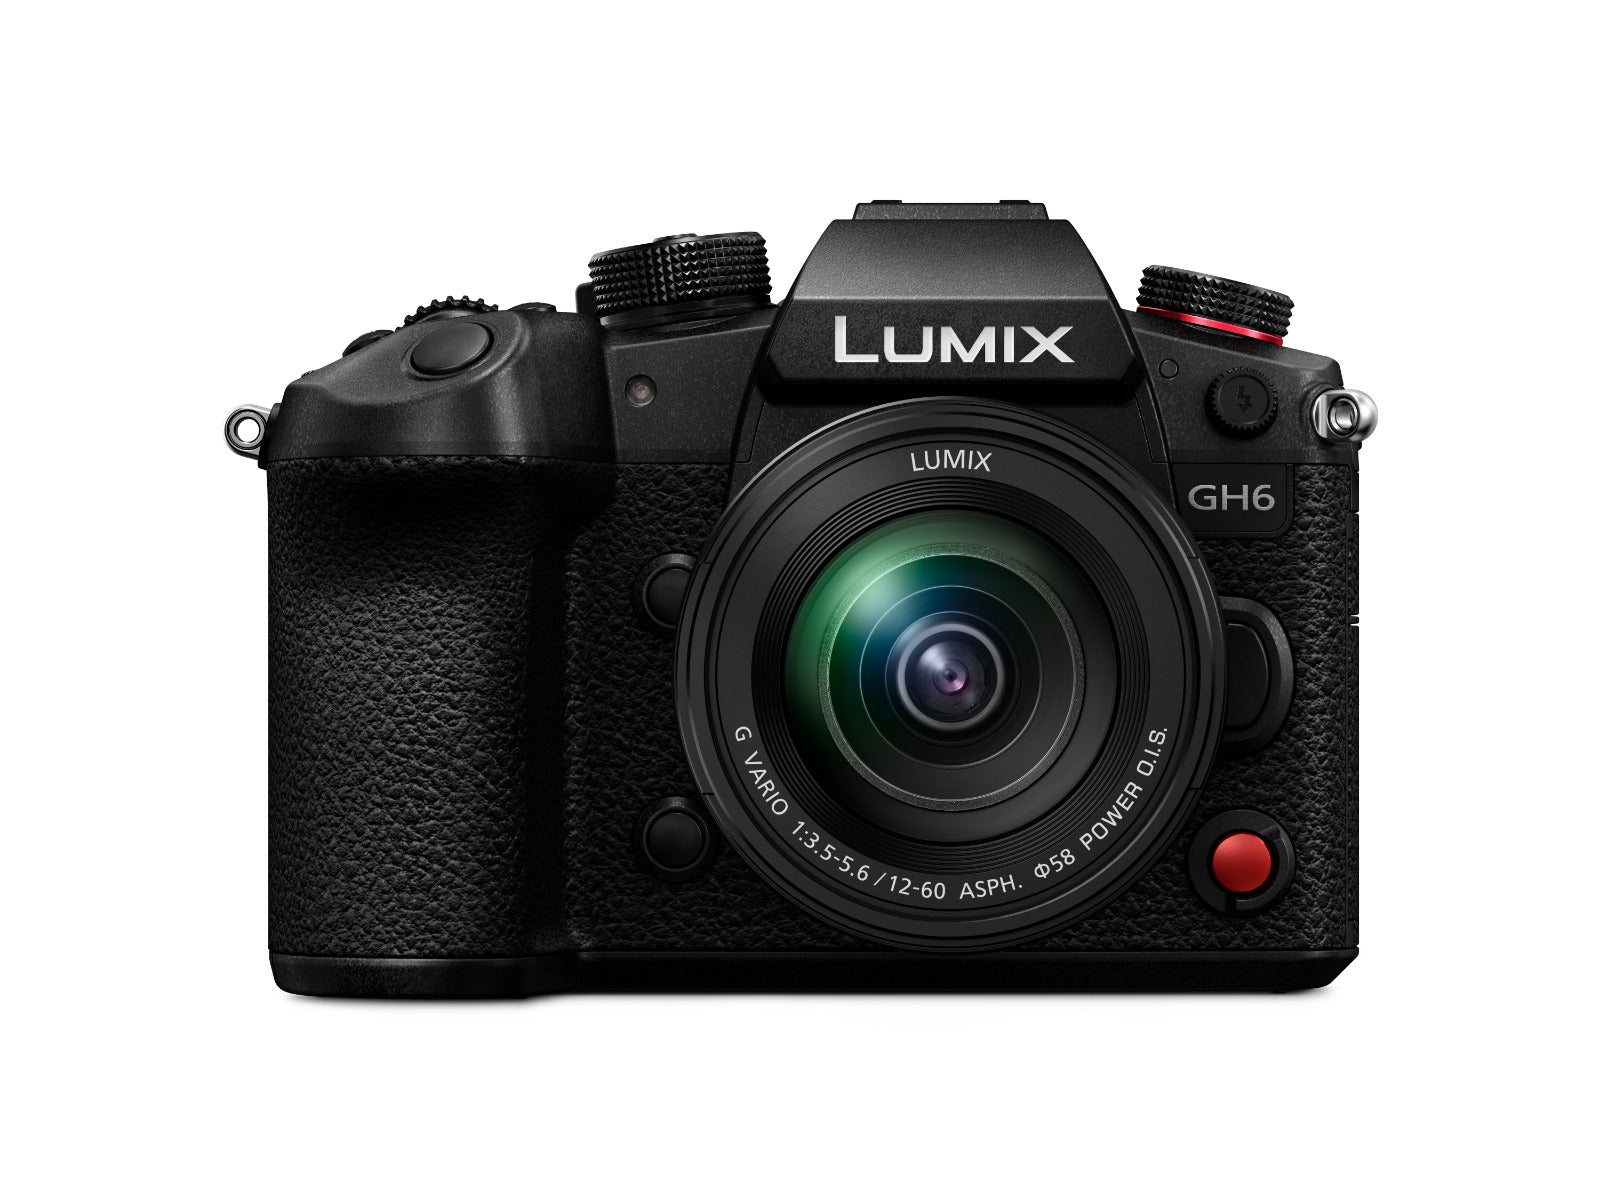 Product Image of Panasonic Lumix GH6 Camera with 12-60mm f3.5-5.6 Lens Kit